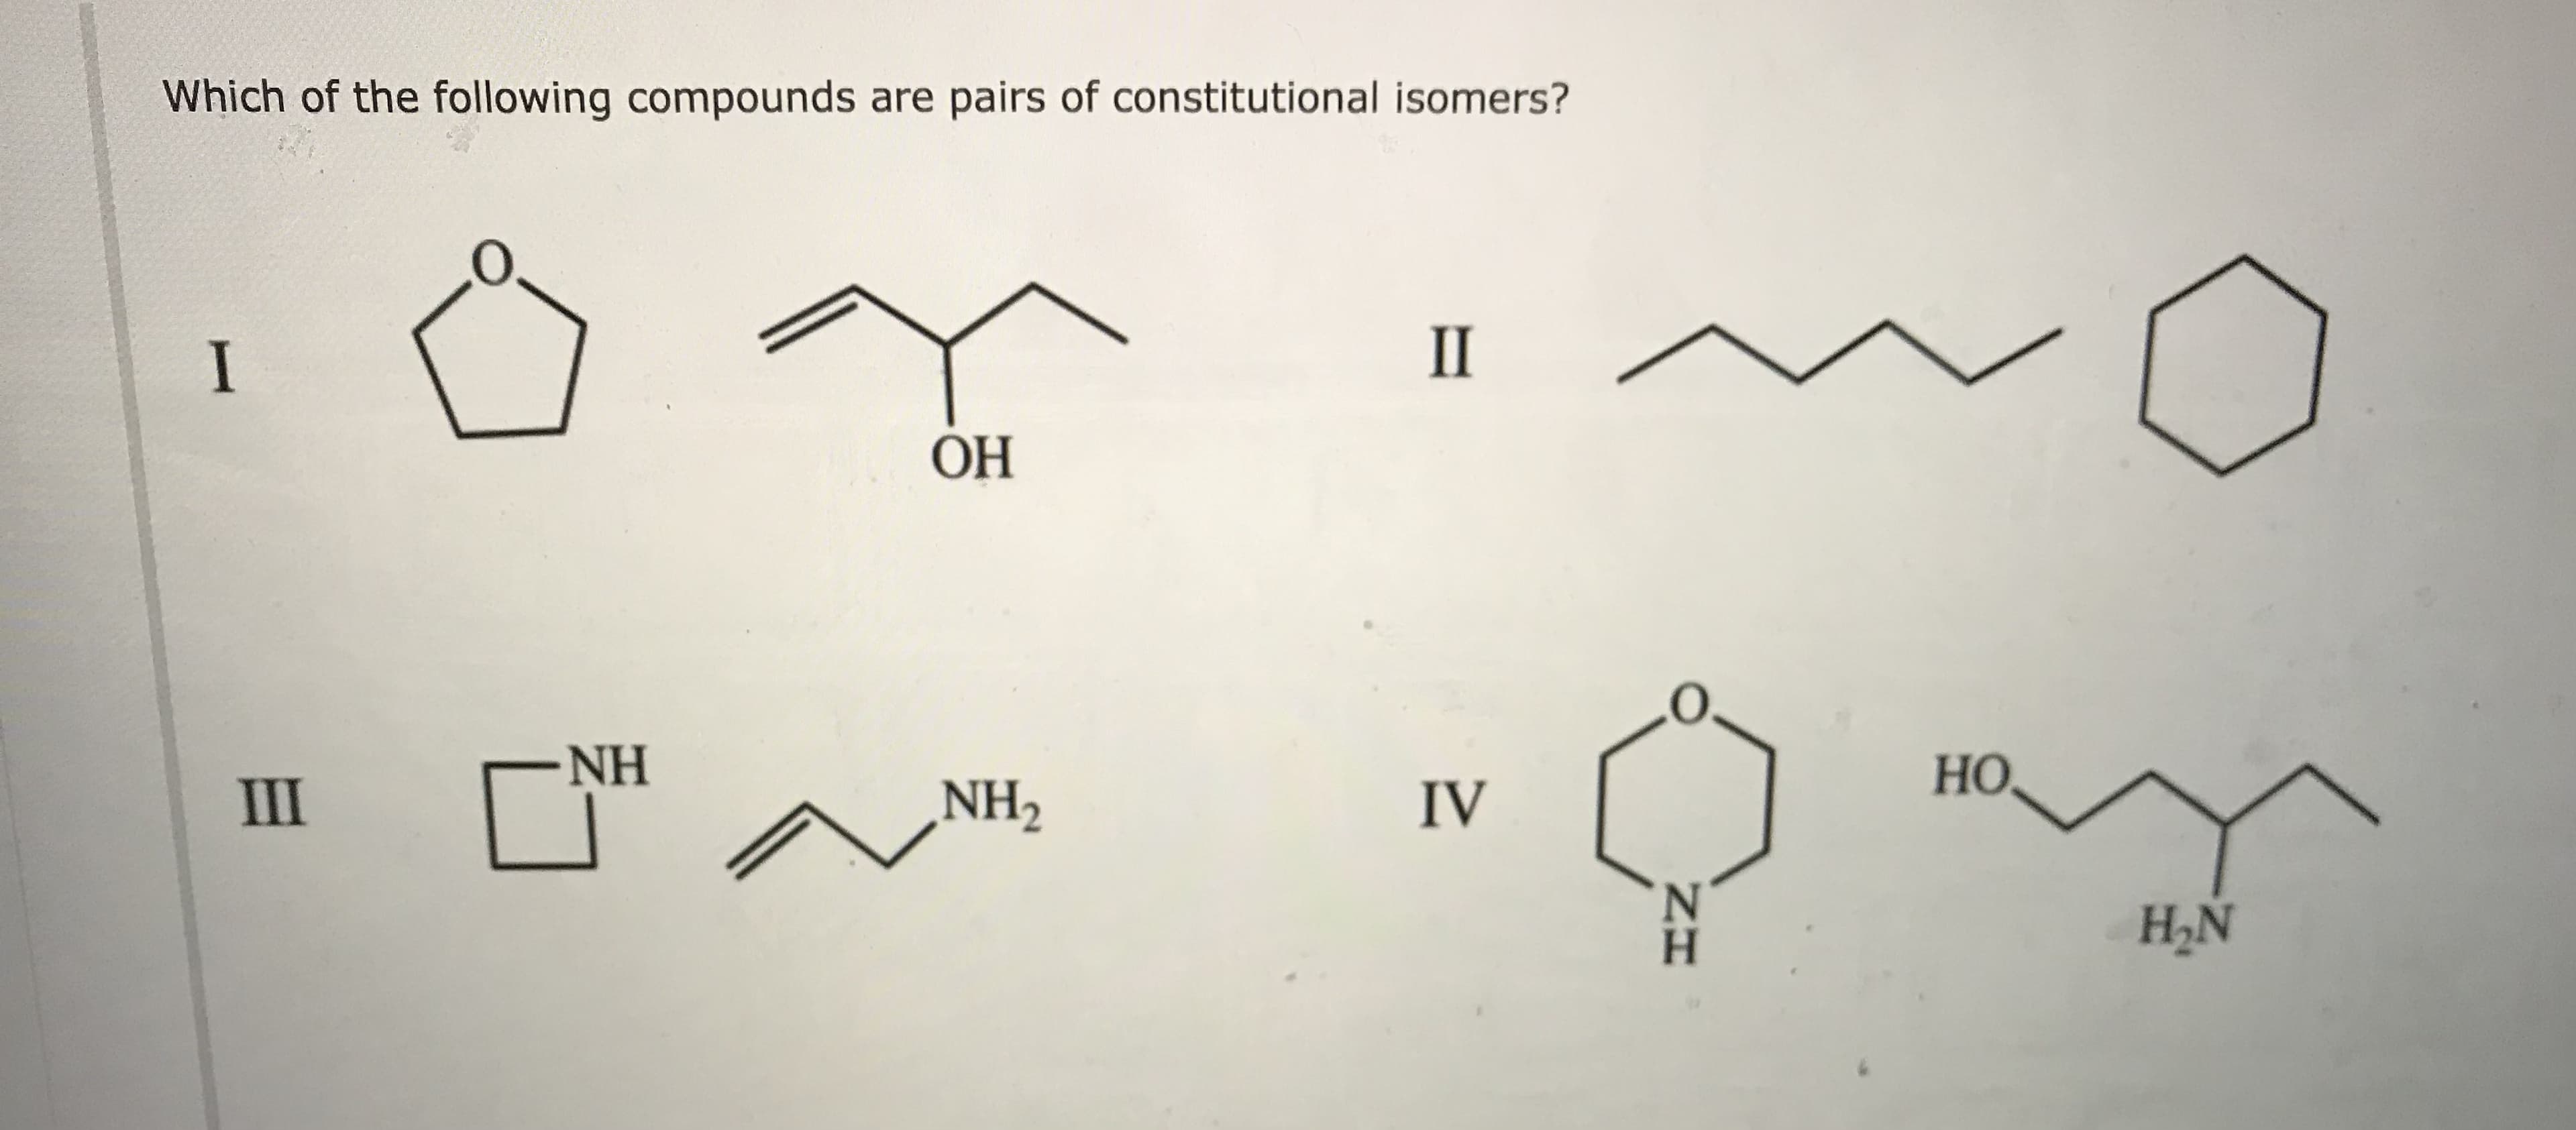 Which of the following compounds are pairs of constitutional isomers?
I
II
OH
NH
HO,
III
NH2
IV
N.
H.
H2N
